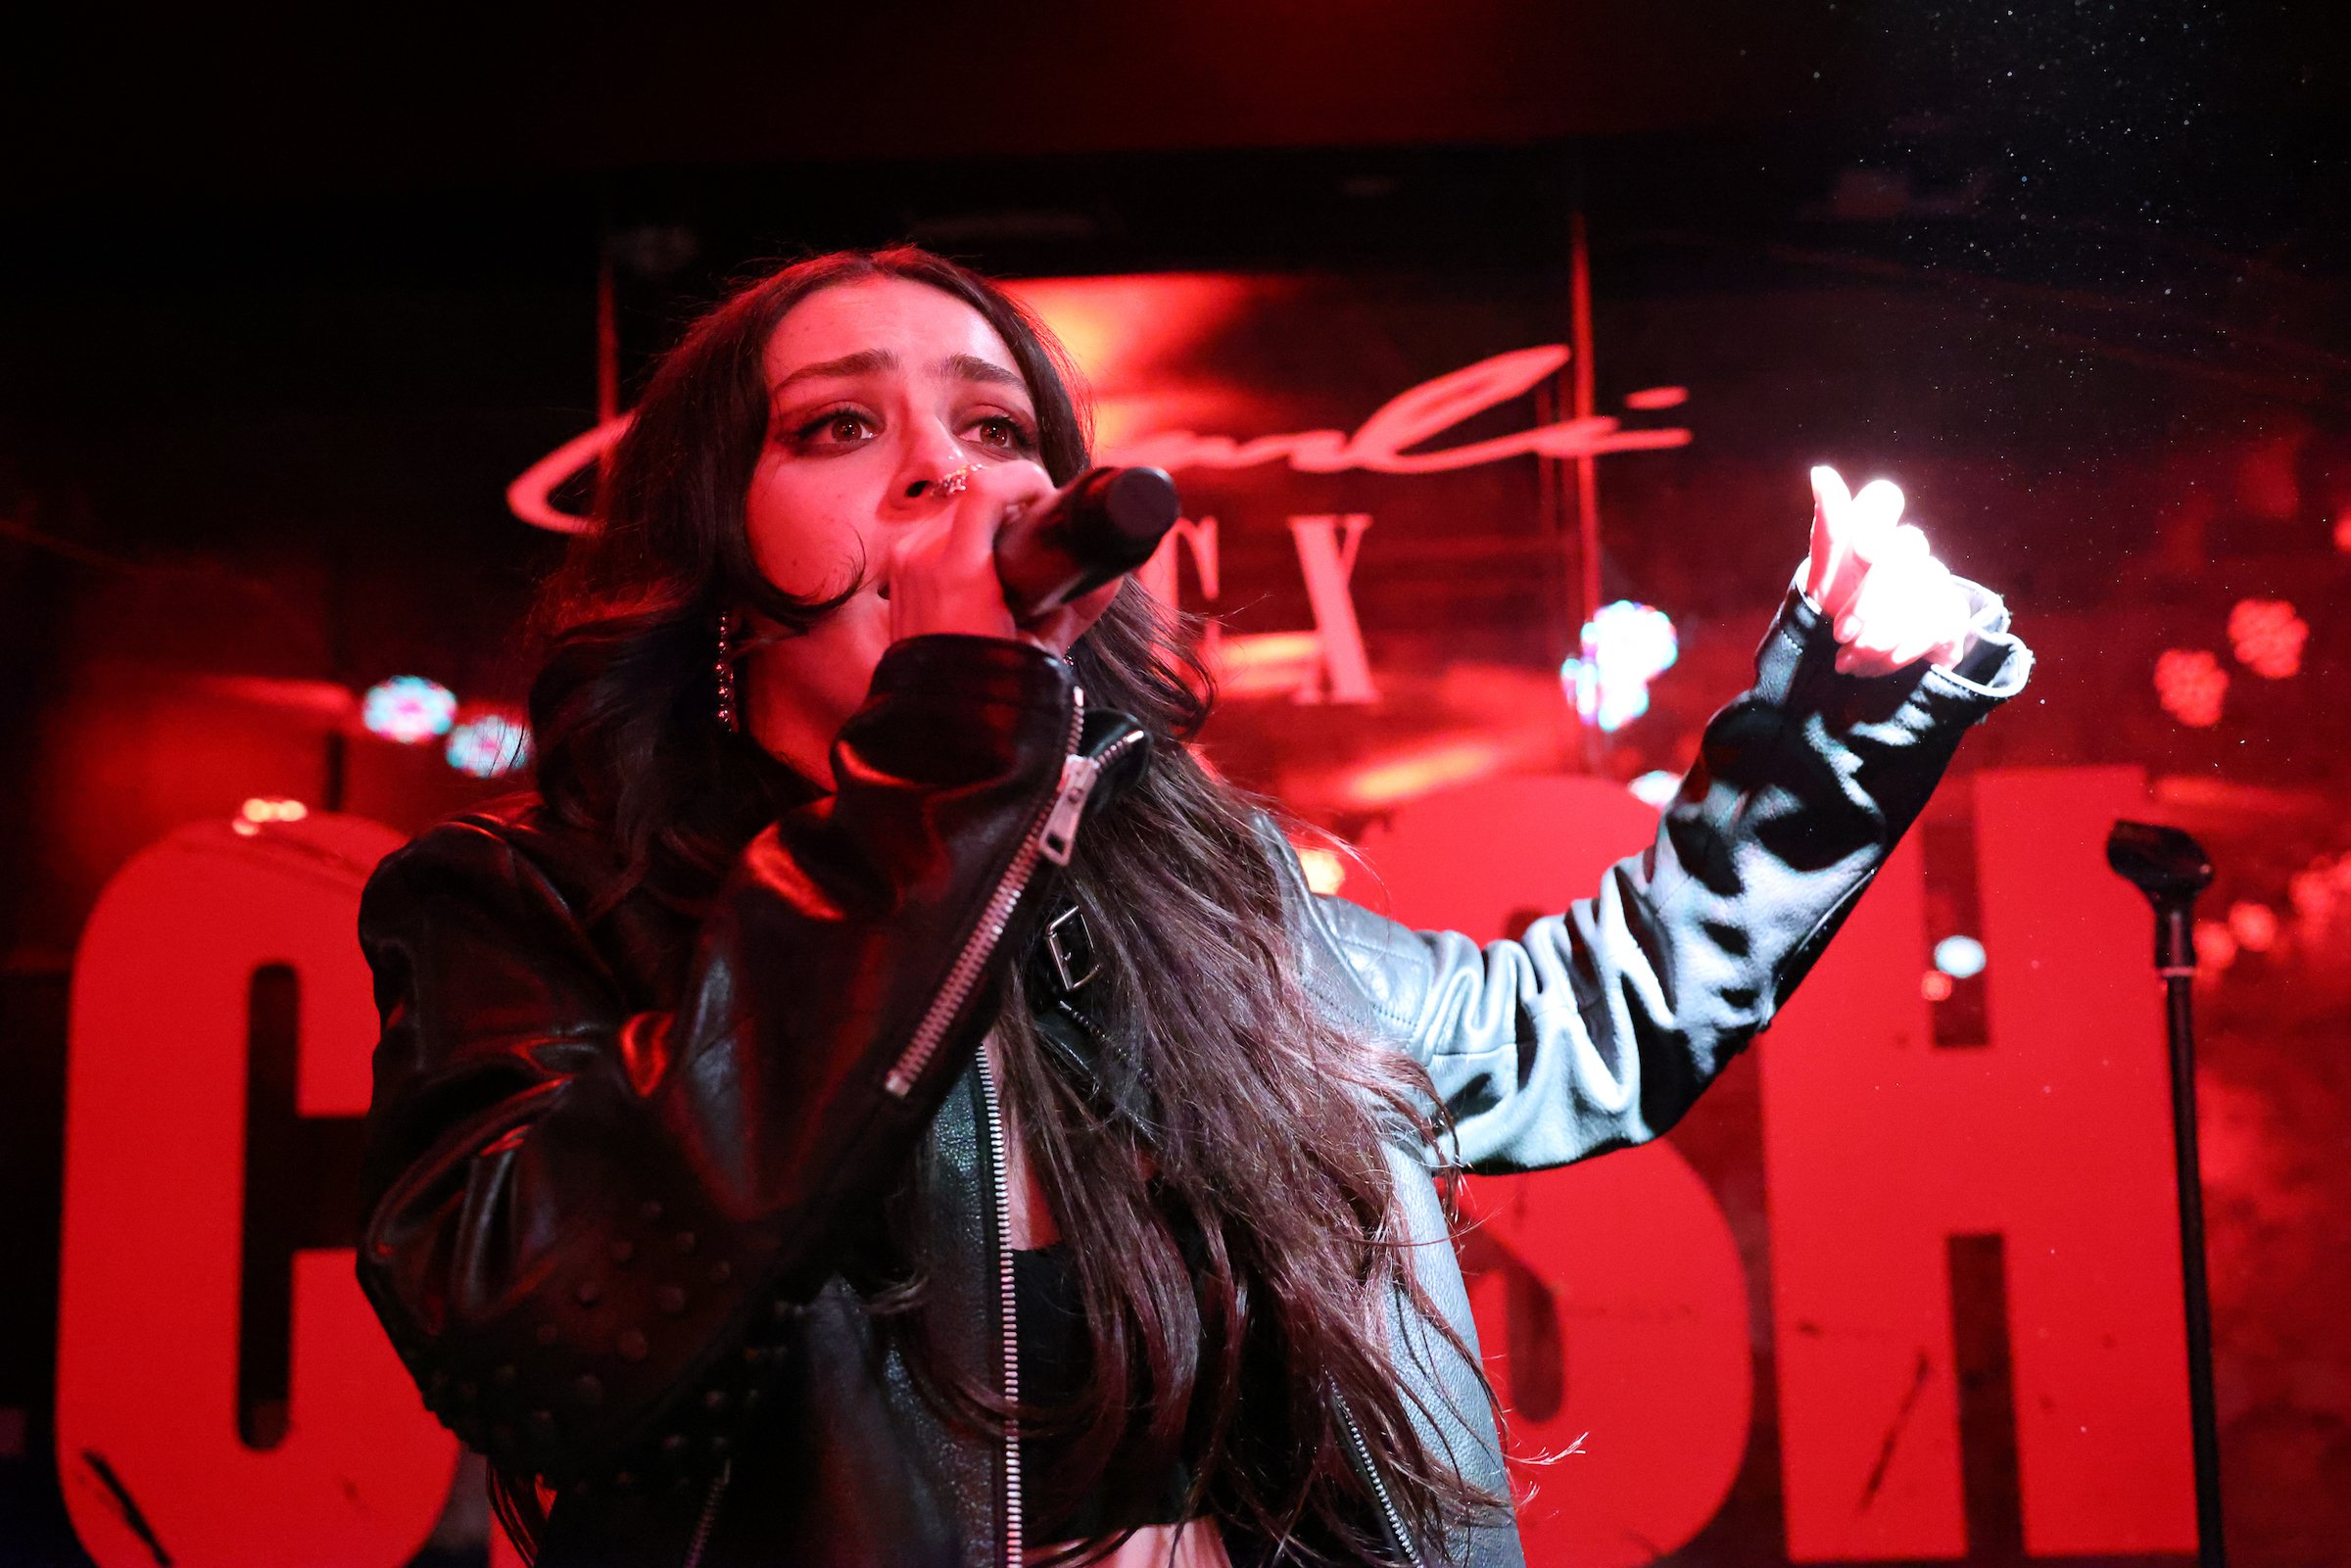 Charli XCX performs at the Charli XCX Crash album launch party with Amazon Music at London Edition - Basement